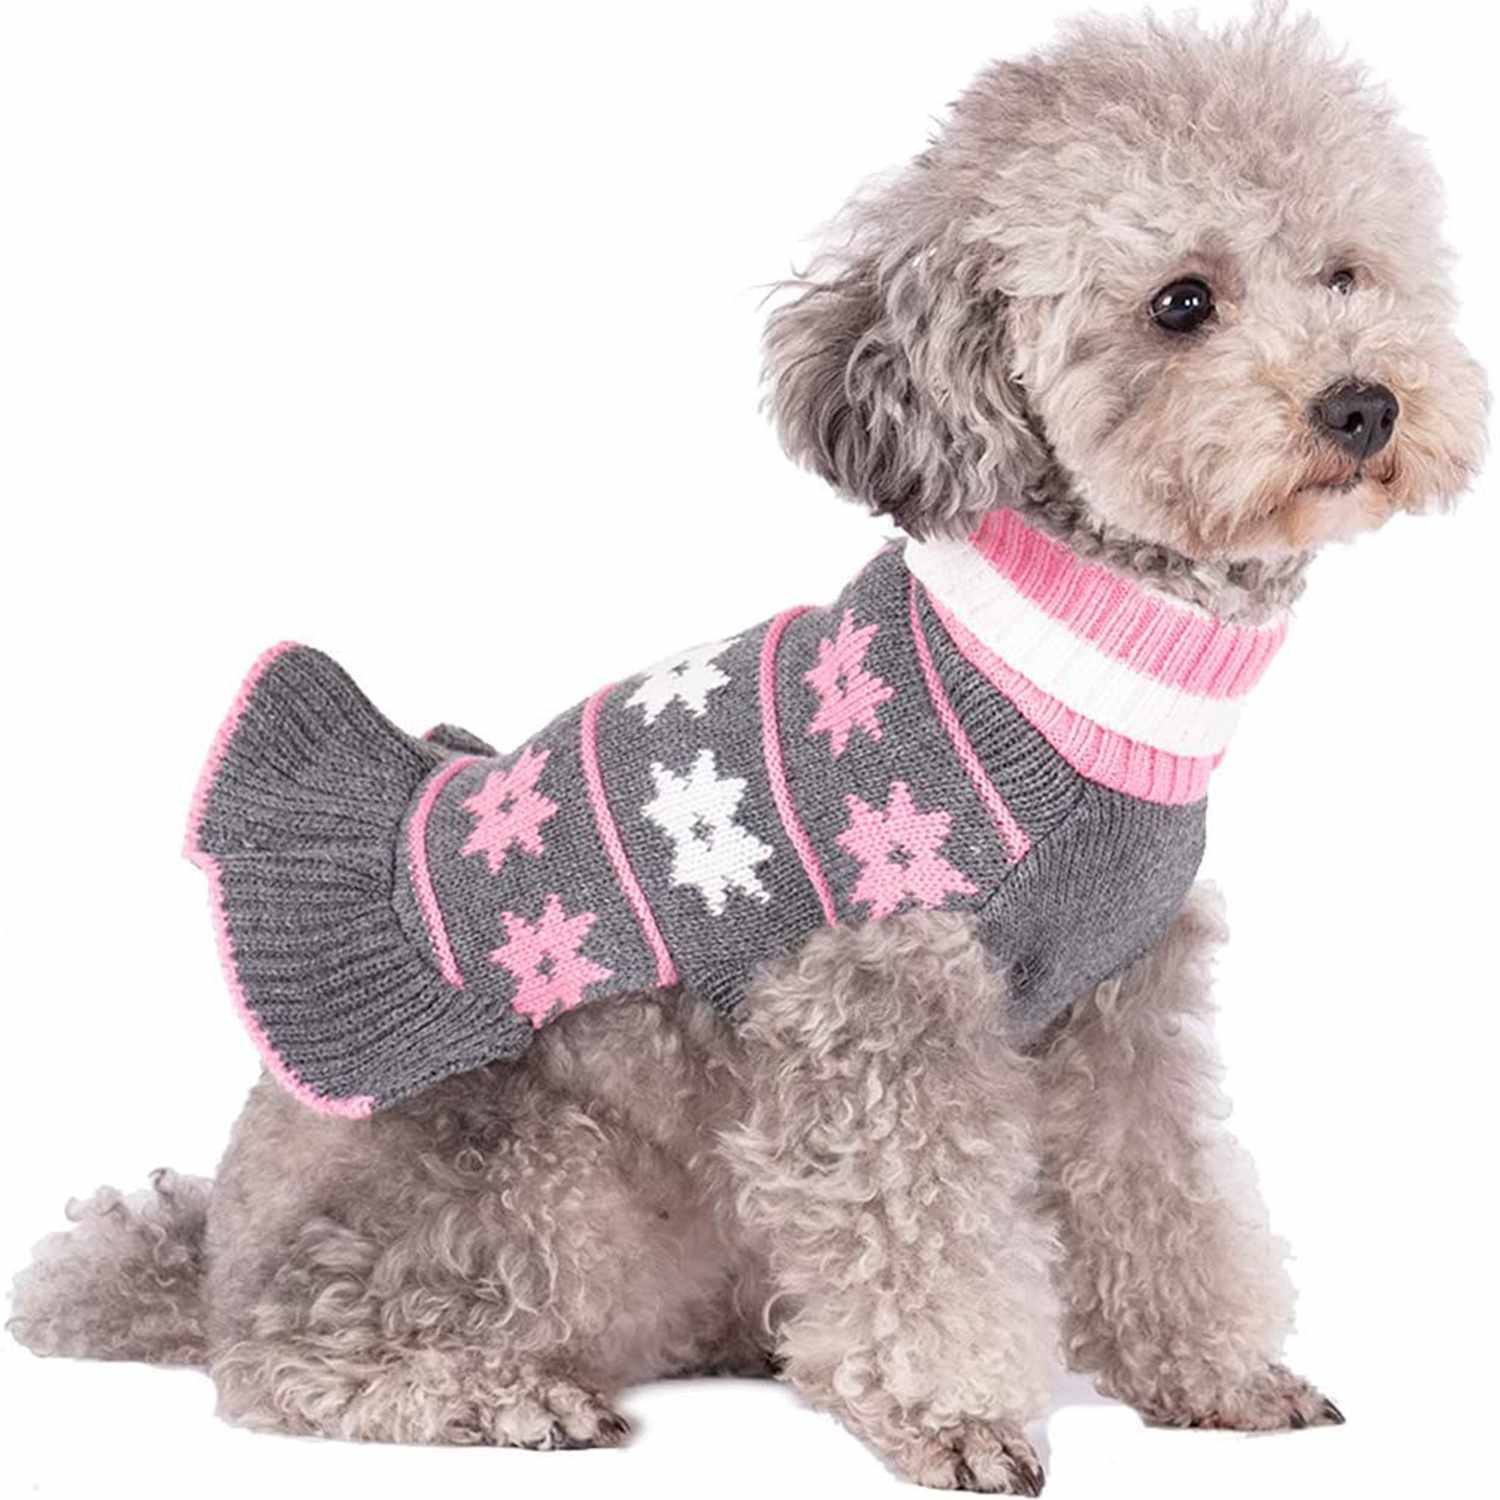 CHBORCHICEN Pet Dog Sweaters Classic Knitwear Turtleneck Winter Warm Puppy Clothing Cute Strawberry and Heart Doggie Sweater 